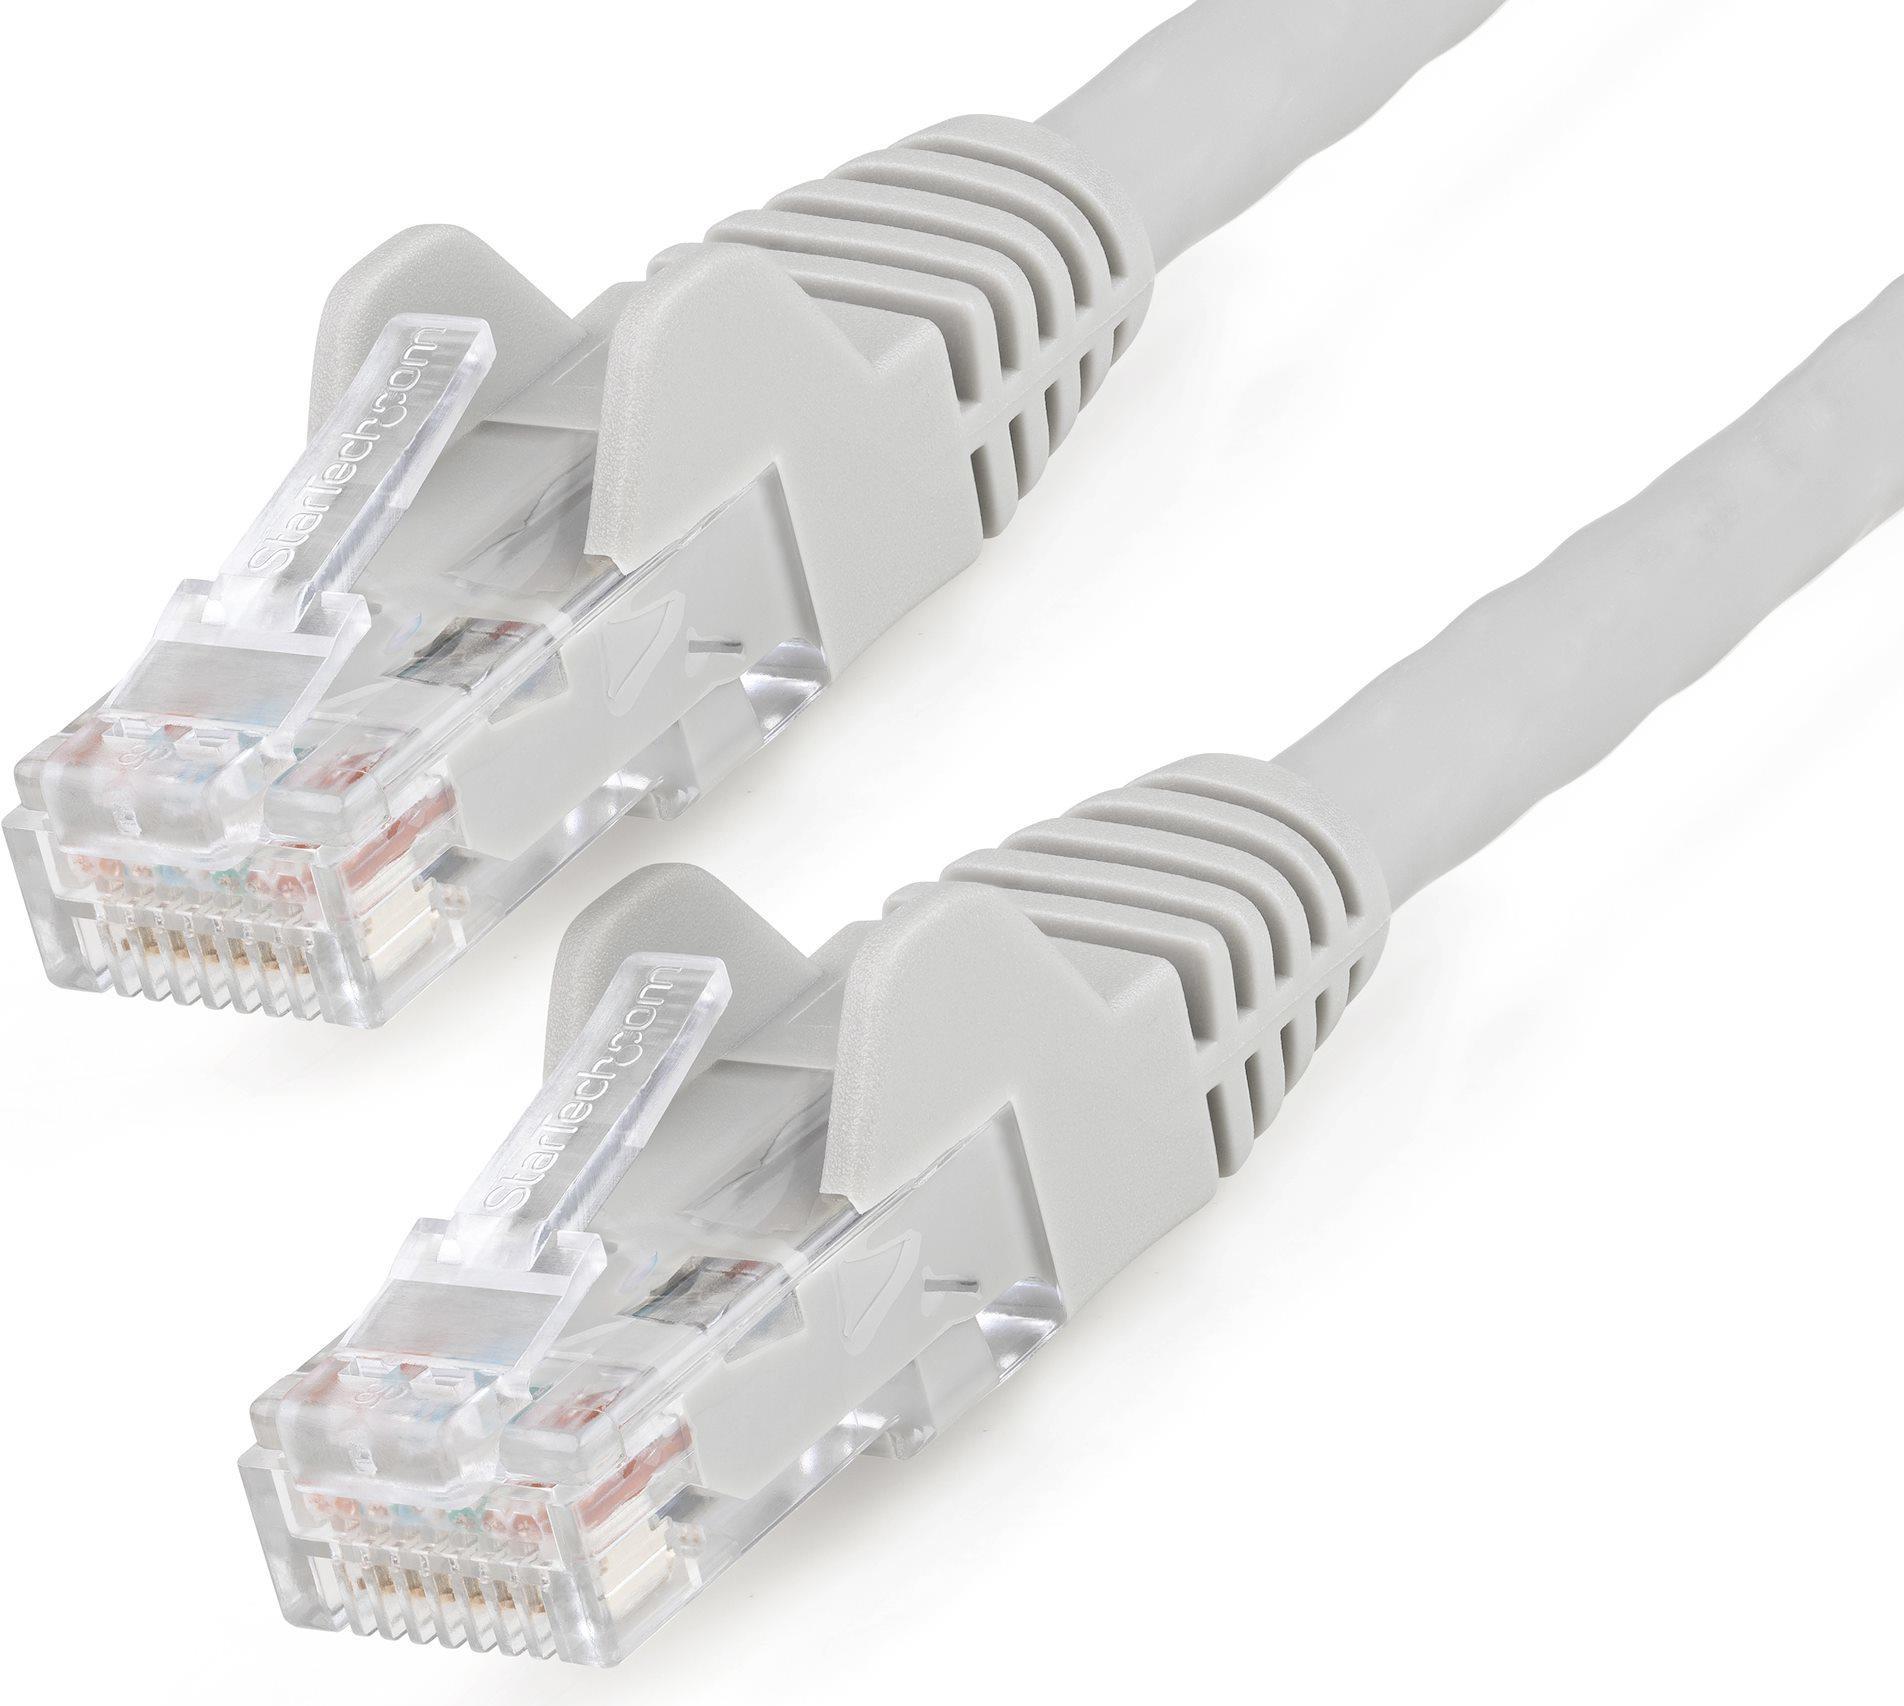 StarTech.com 10m LSZH CAT6 Ethernet Cable, 10 Gigabit Snagless RJ45 100W PoE Network Patch Cord with Strain Relief, CAT 6 10GbE UTP, Grey, Individually Tested/ETL, Low Smoke Zero Halogen - Category 6 - 24AWG (N6LPATCH10MGR) - Patch-Kabel - RJ-45 (M) bis RJ-45 (M) - 10 m - 6 mm -